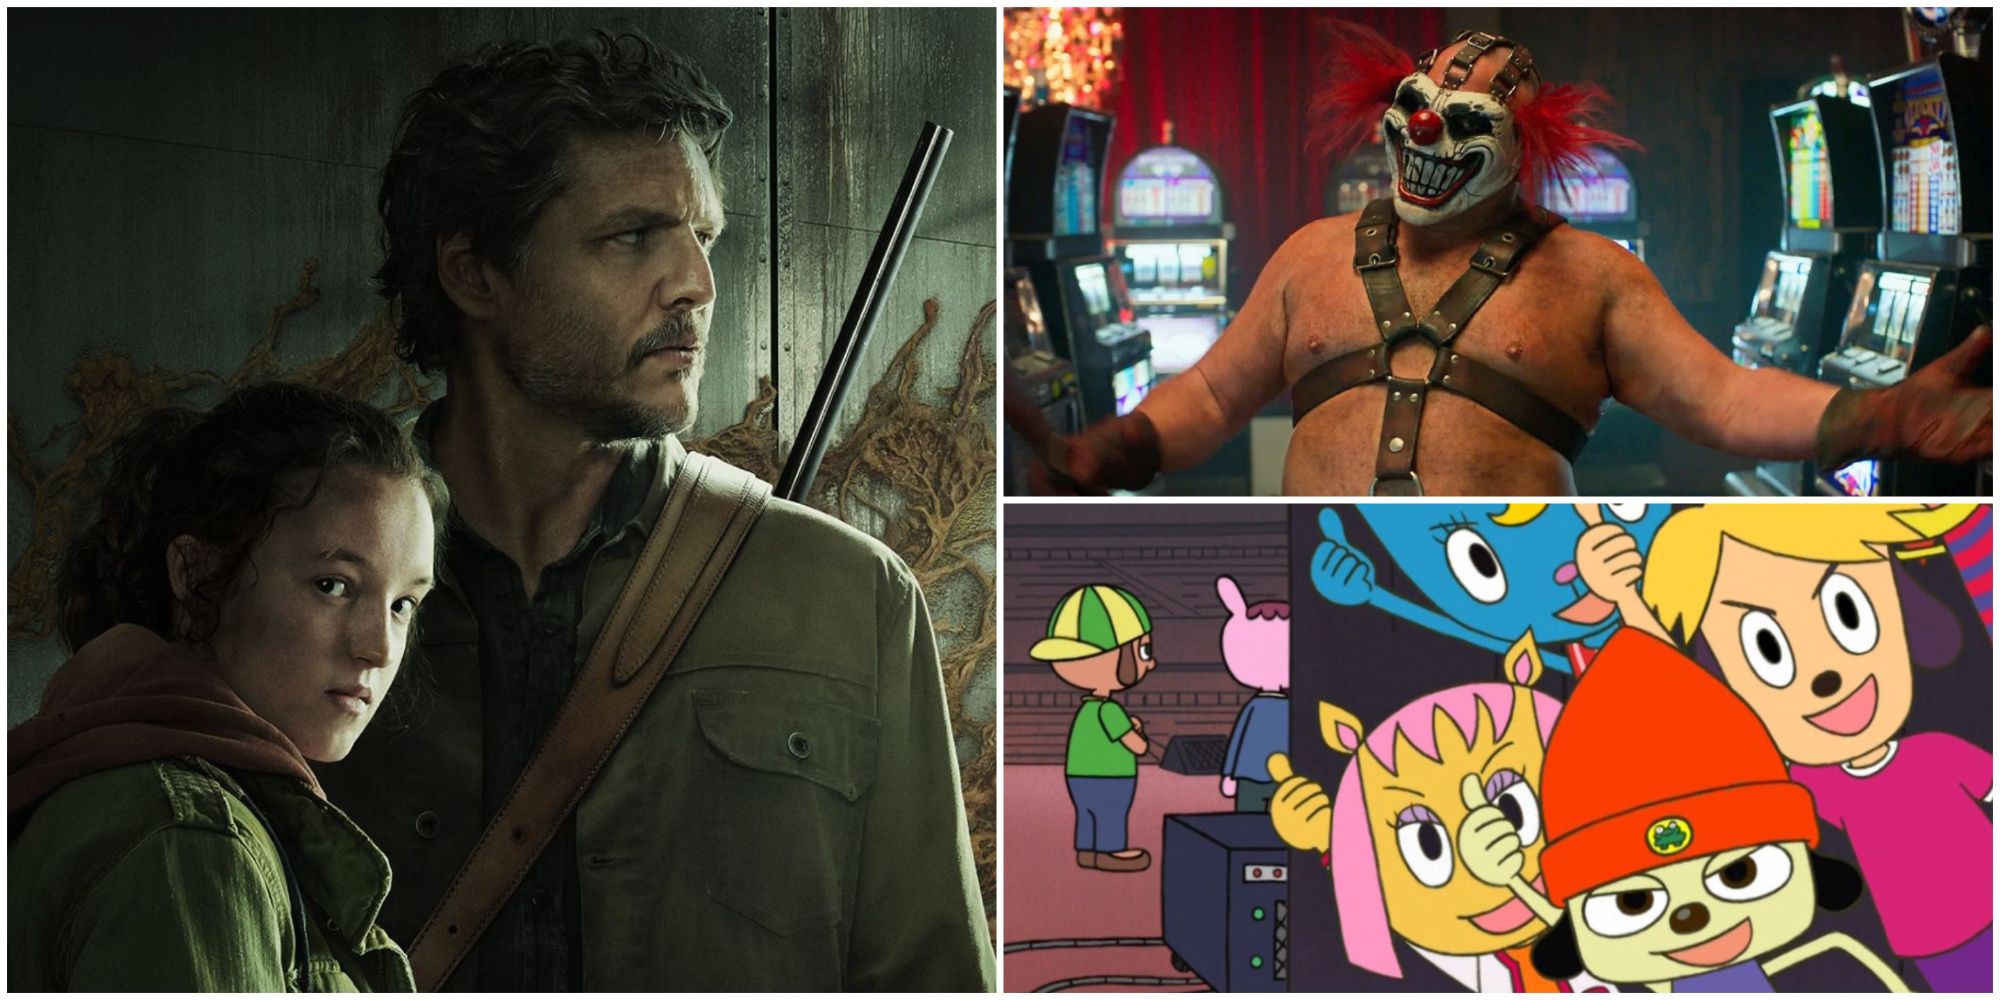 Best PlayStation TV Shows- The Last of Us Twisted Metal Parappa the Rapper